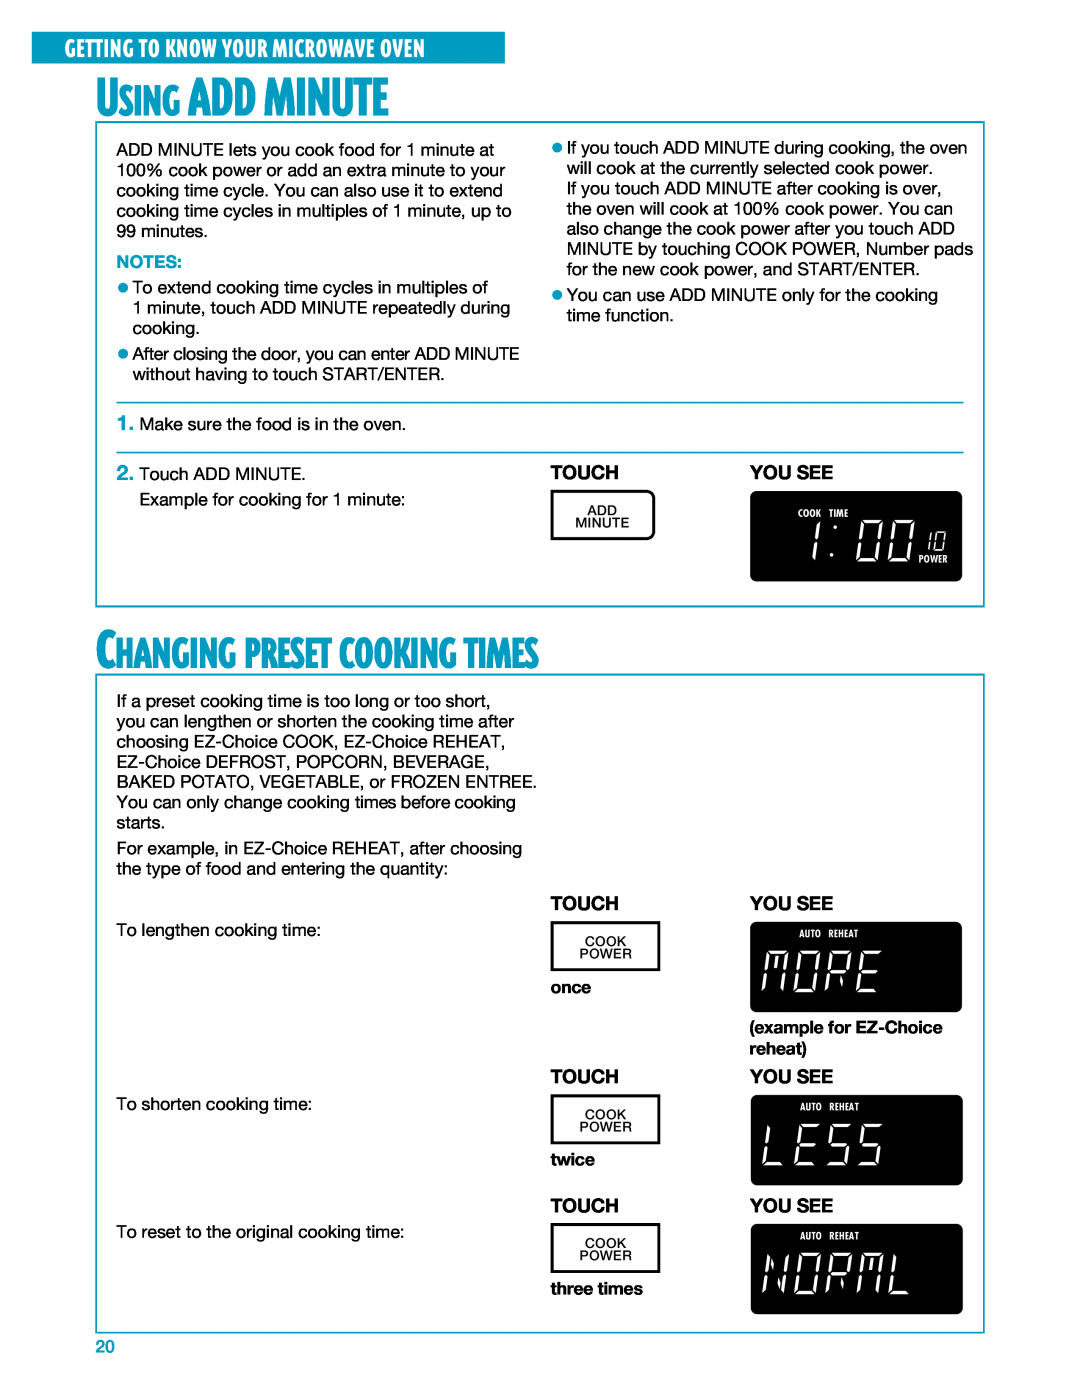 Whirlpool MH7140XF Using Add Minute, Changing Preset Cooking Times, once, twice, three times, example for EZ-Choice reheat 